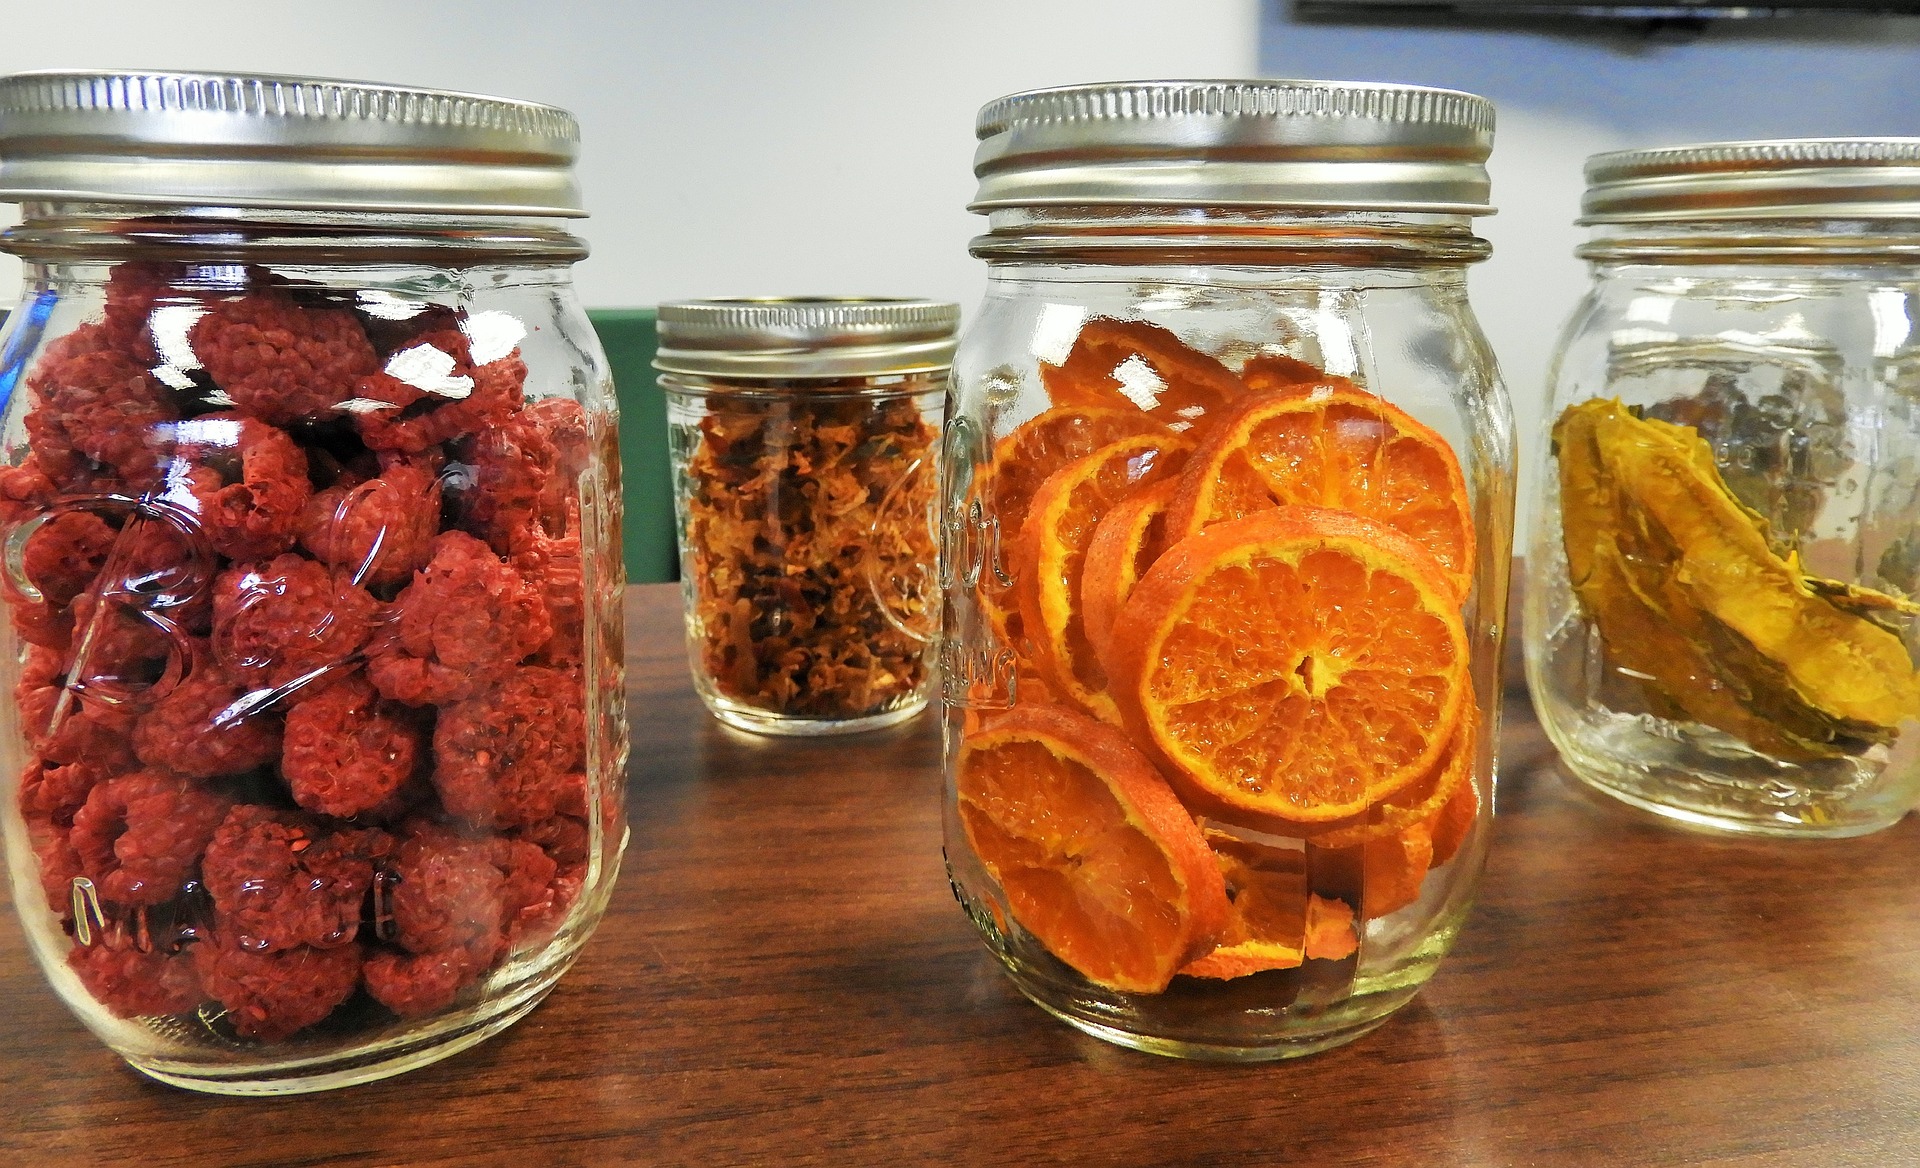 sealed mason jars full of dehydrated produce including a jar of raspberries and one of orange slices